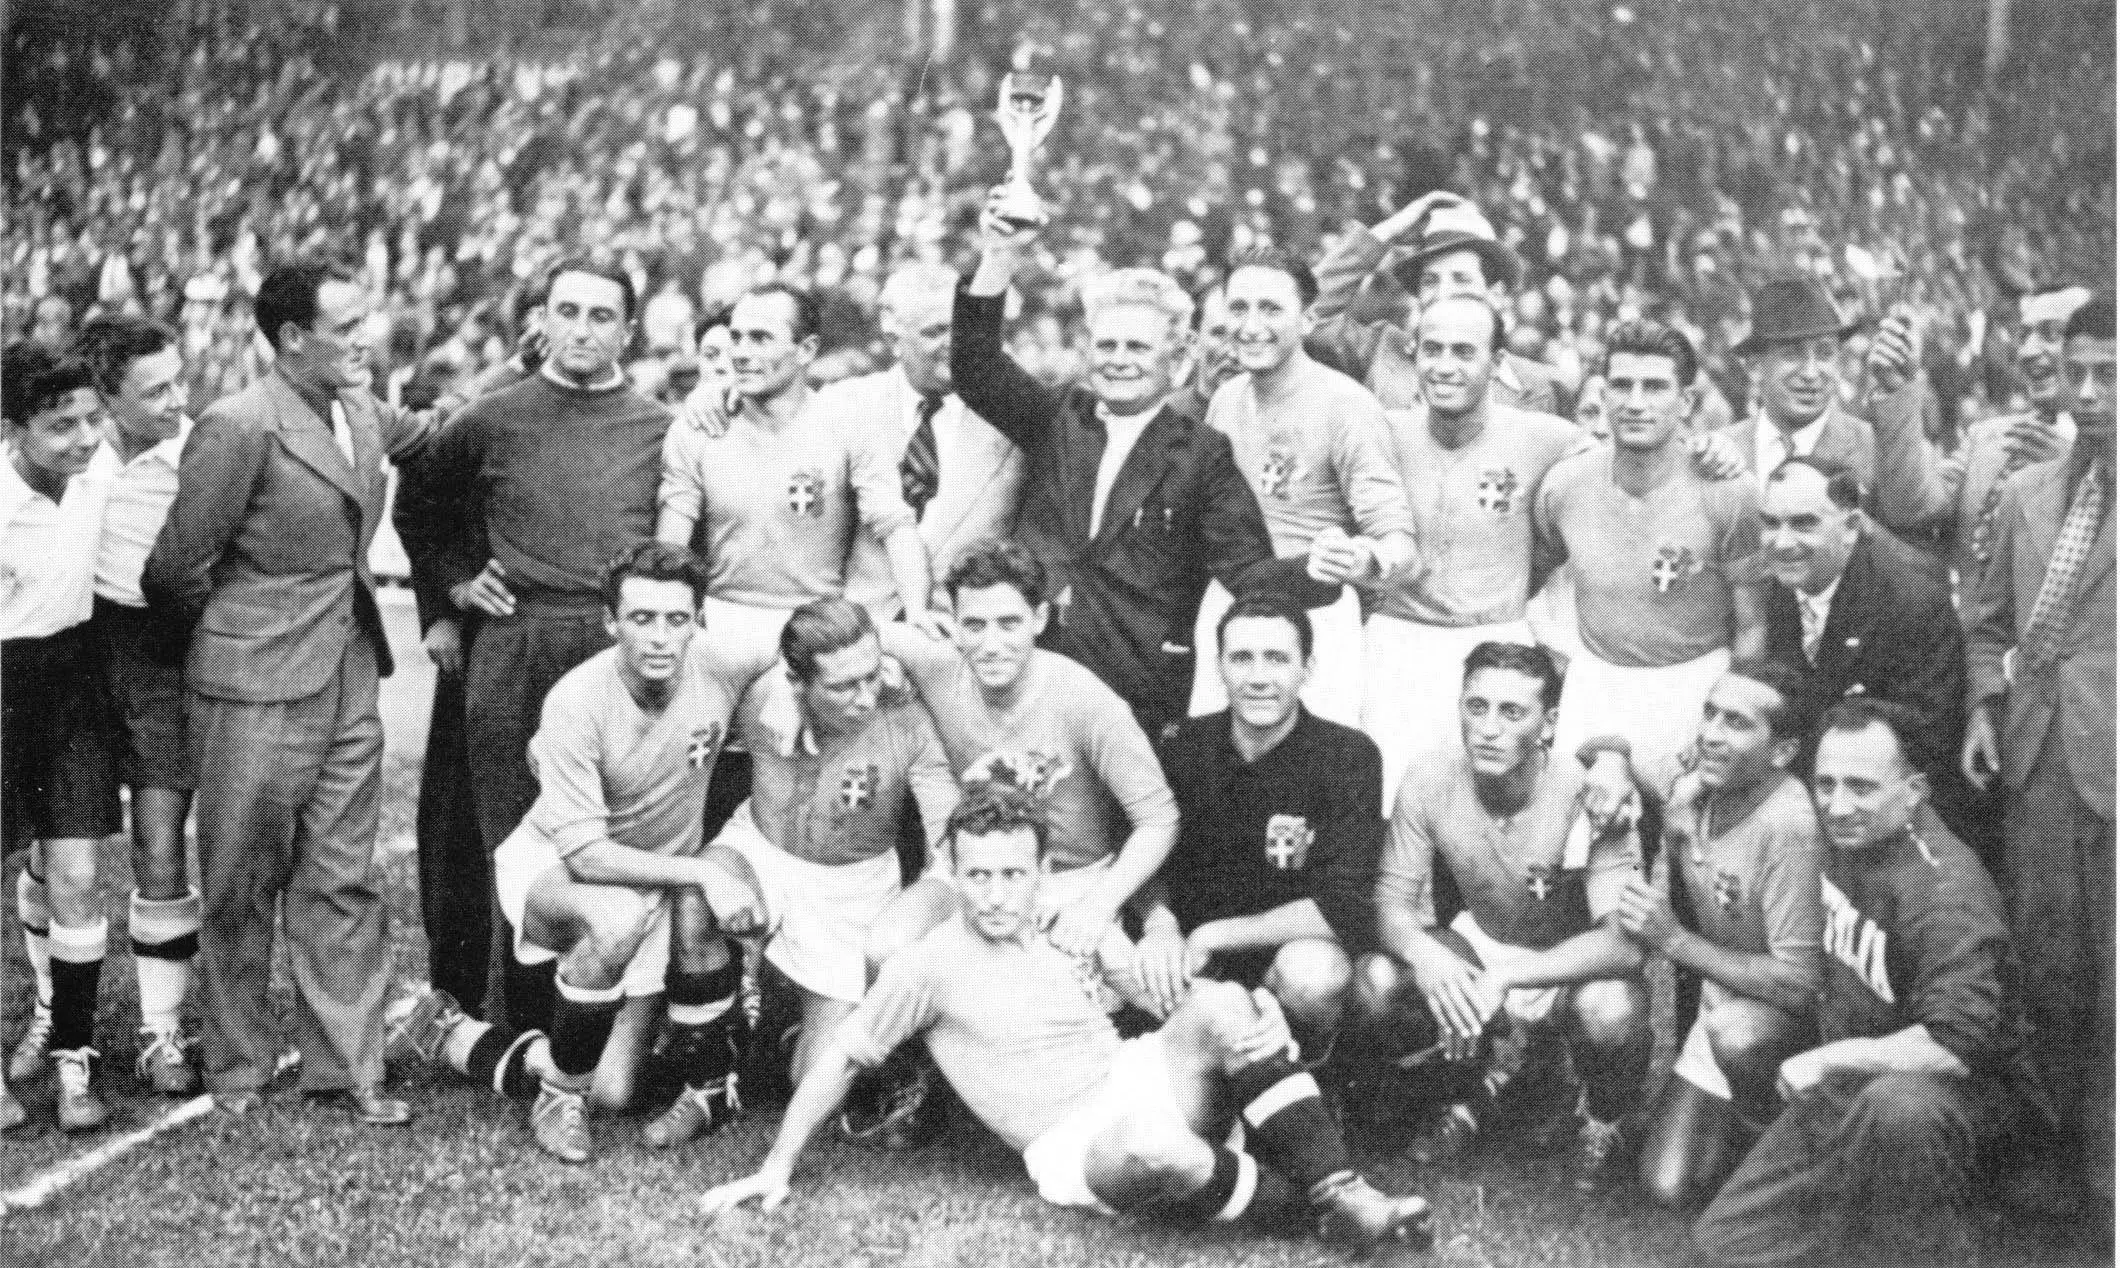 Italy beats Hungary in the 1938 FIFA World Cup final (